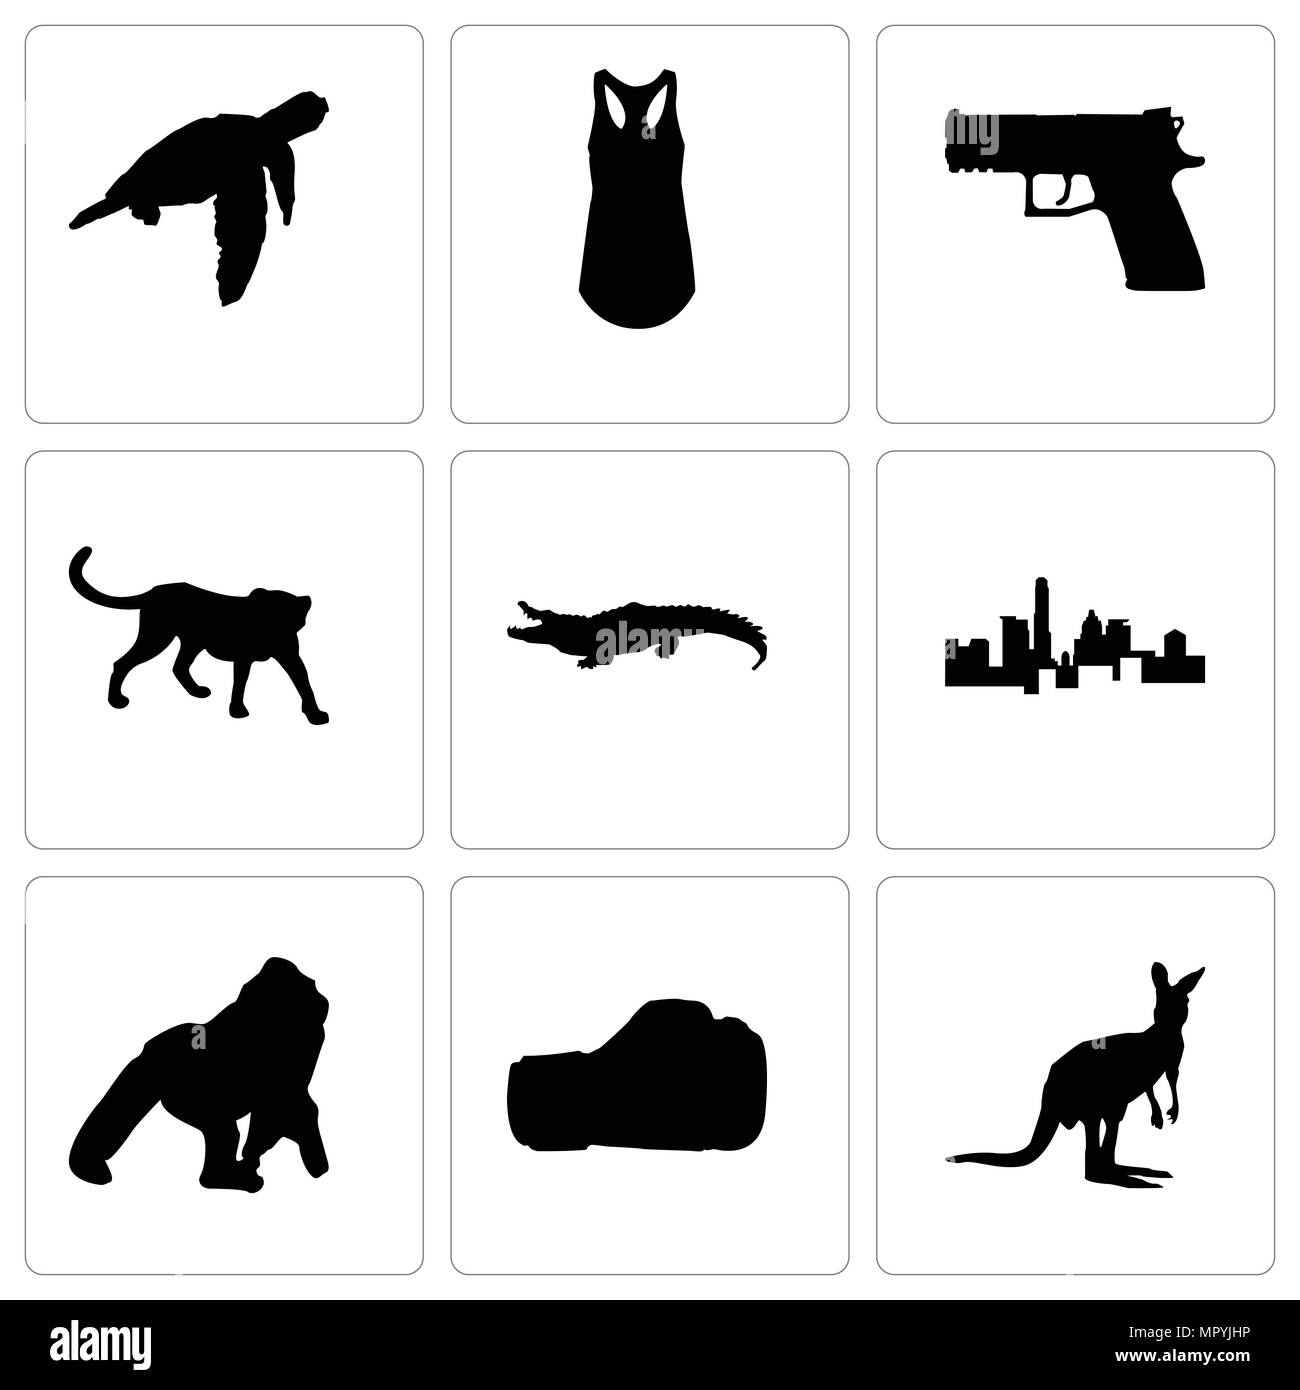 Set Of icons tank & - Image kangaroo, editable can simple as top, Art 9 used glove, alligator, handgun, Vector boxing cheetah, of sea such be Stock state texas, gorilla, turtle, Alamy